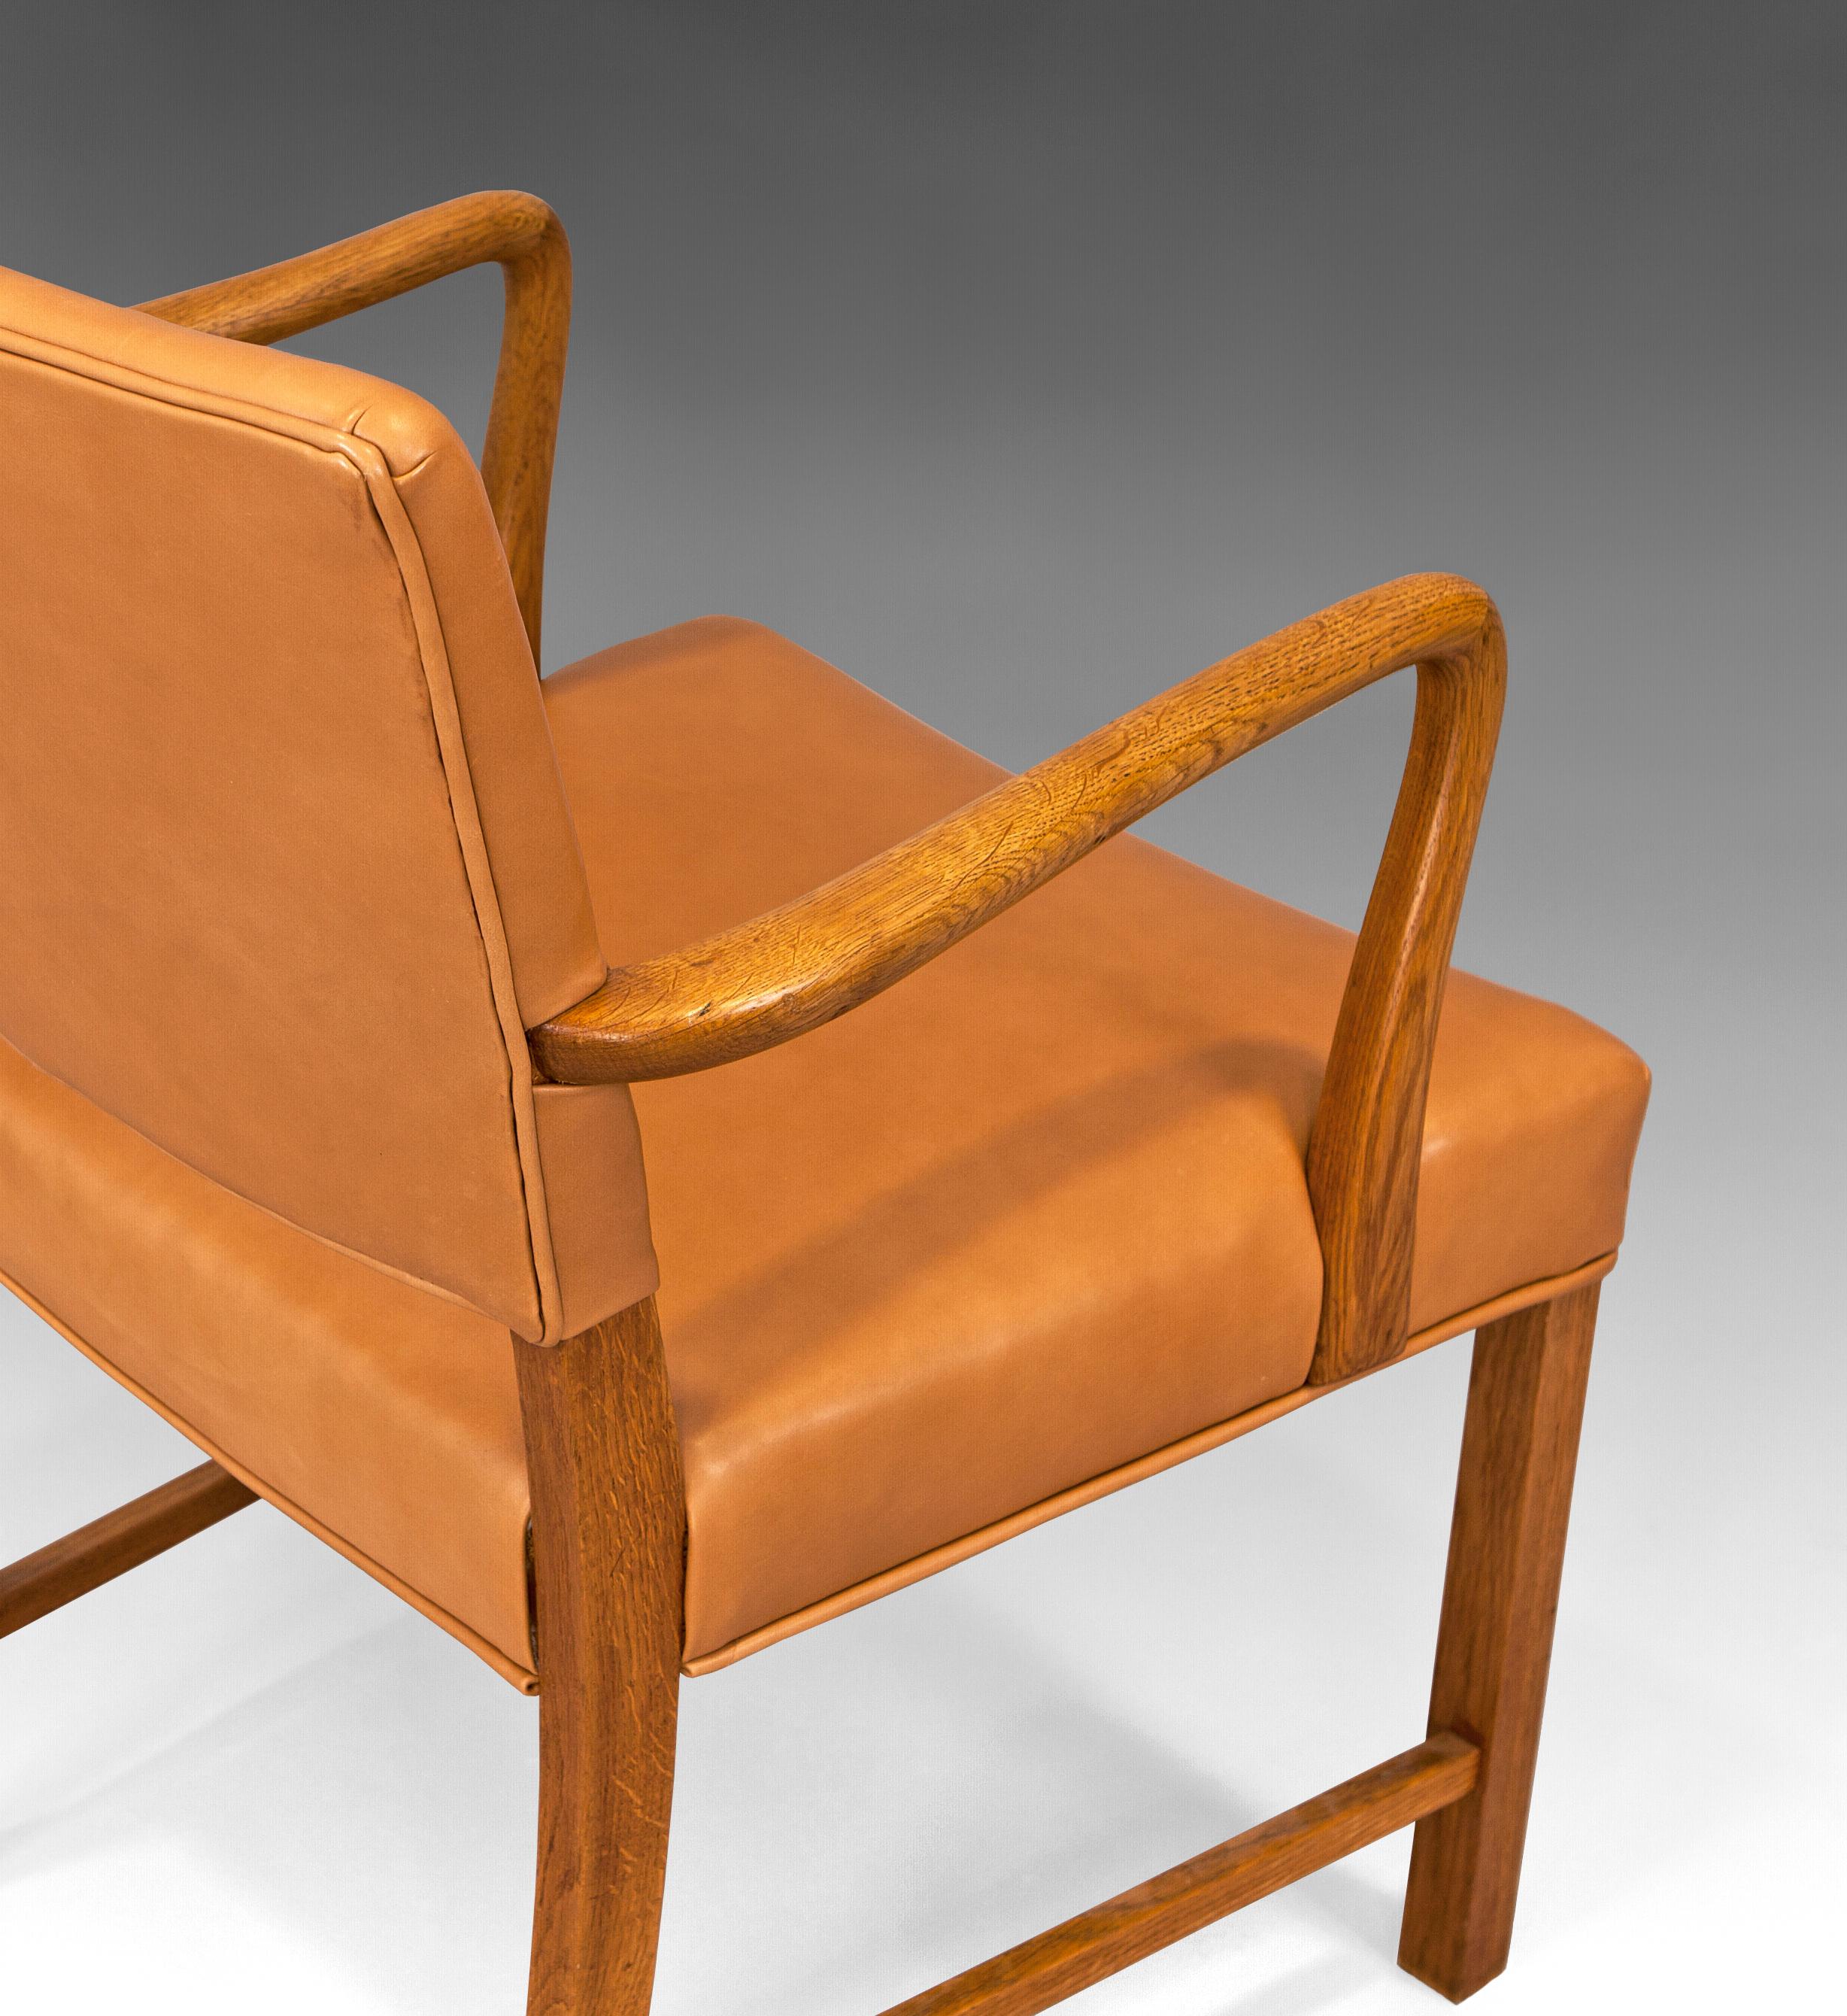 Danish 1930s Solid Oak and Leather Armchair Attributed to Kaare Klint For Sale